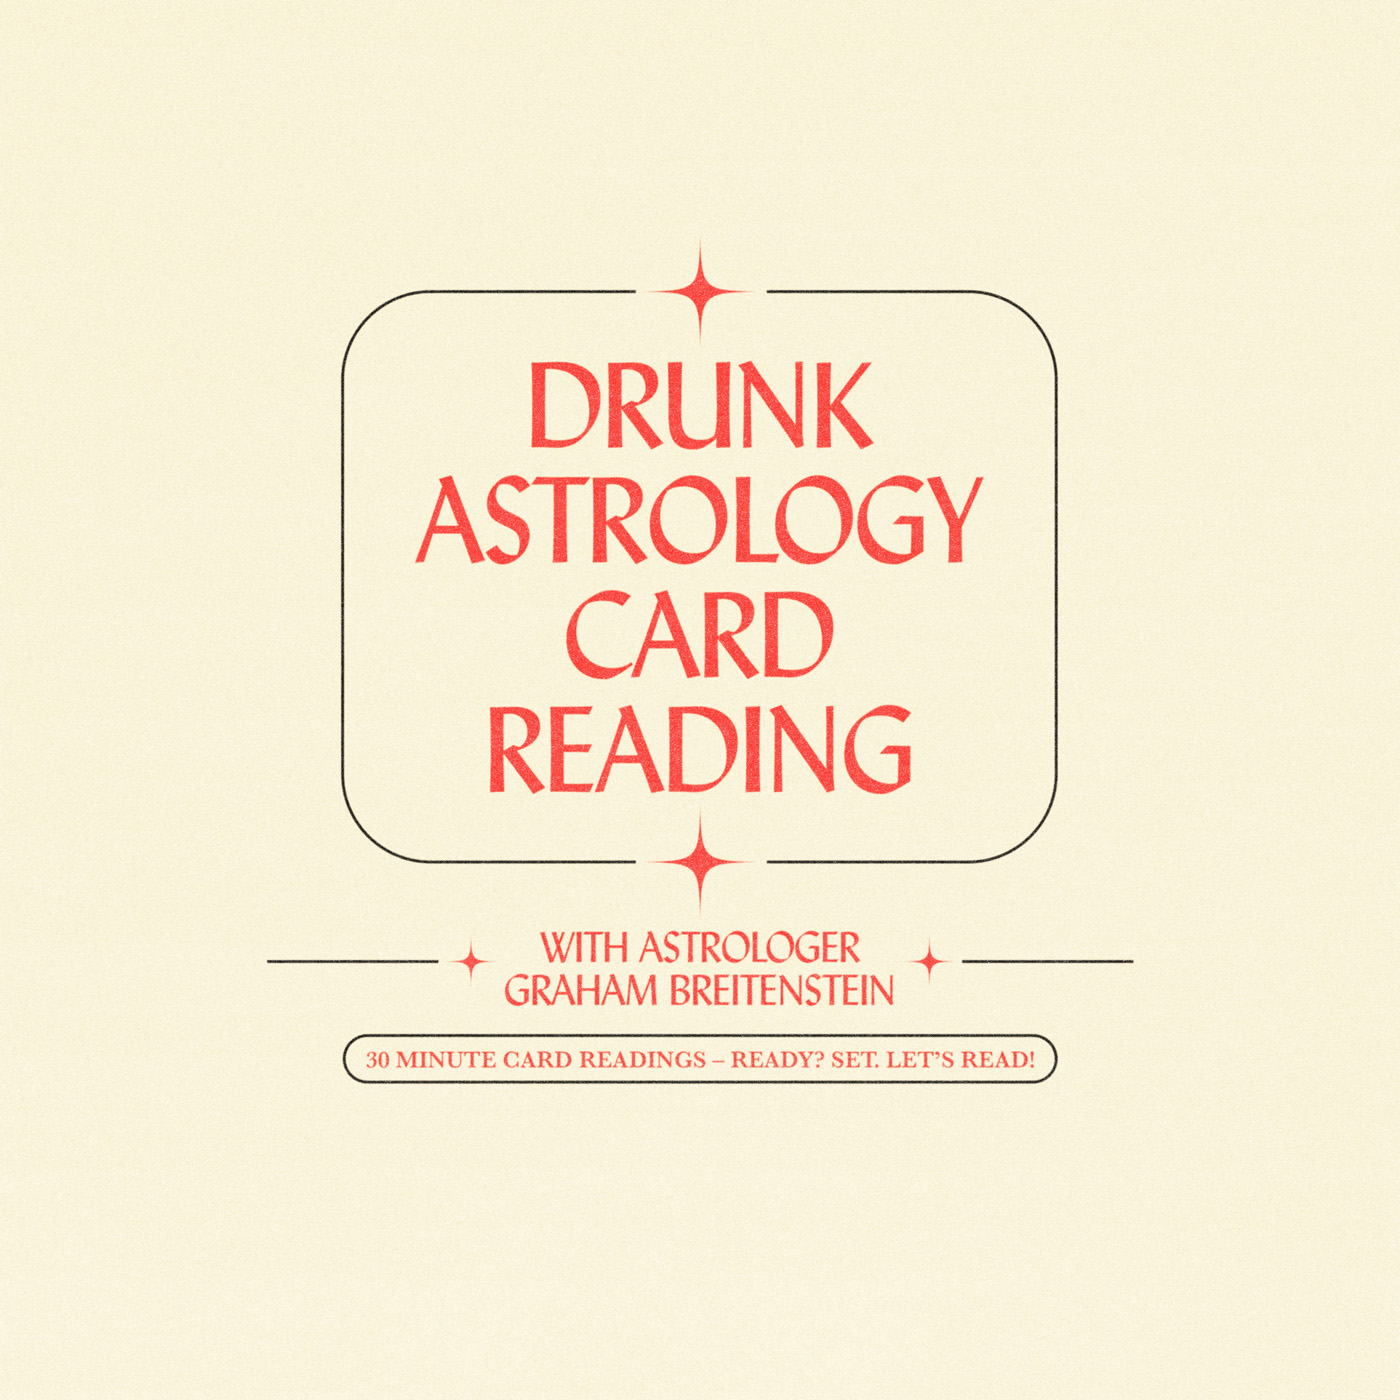 Engaging brochure titled "Drunk Astrology Card Reading" with intriguing text and captivating content.